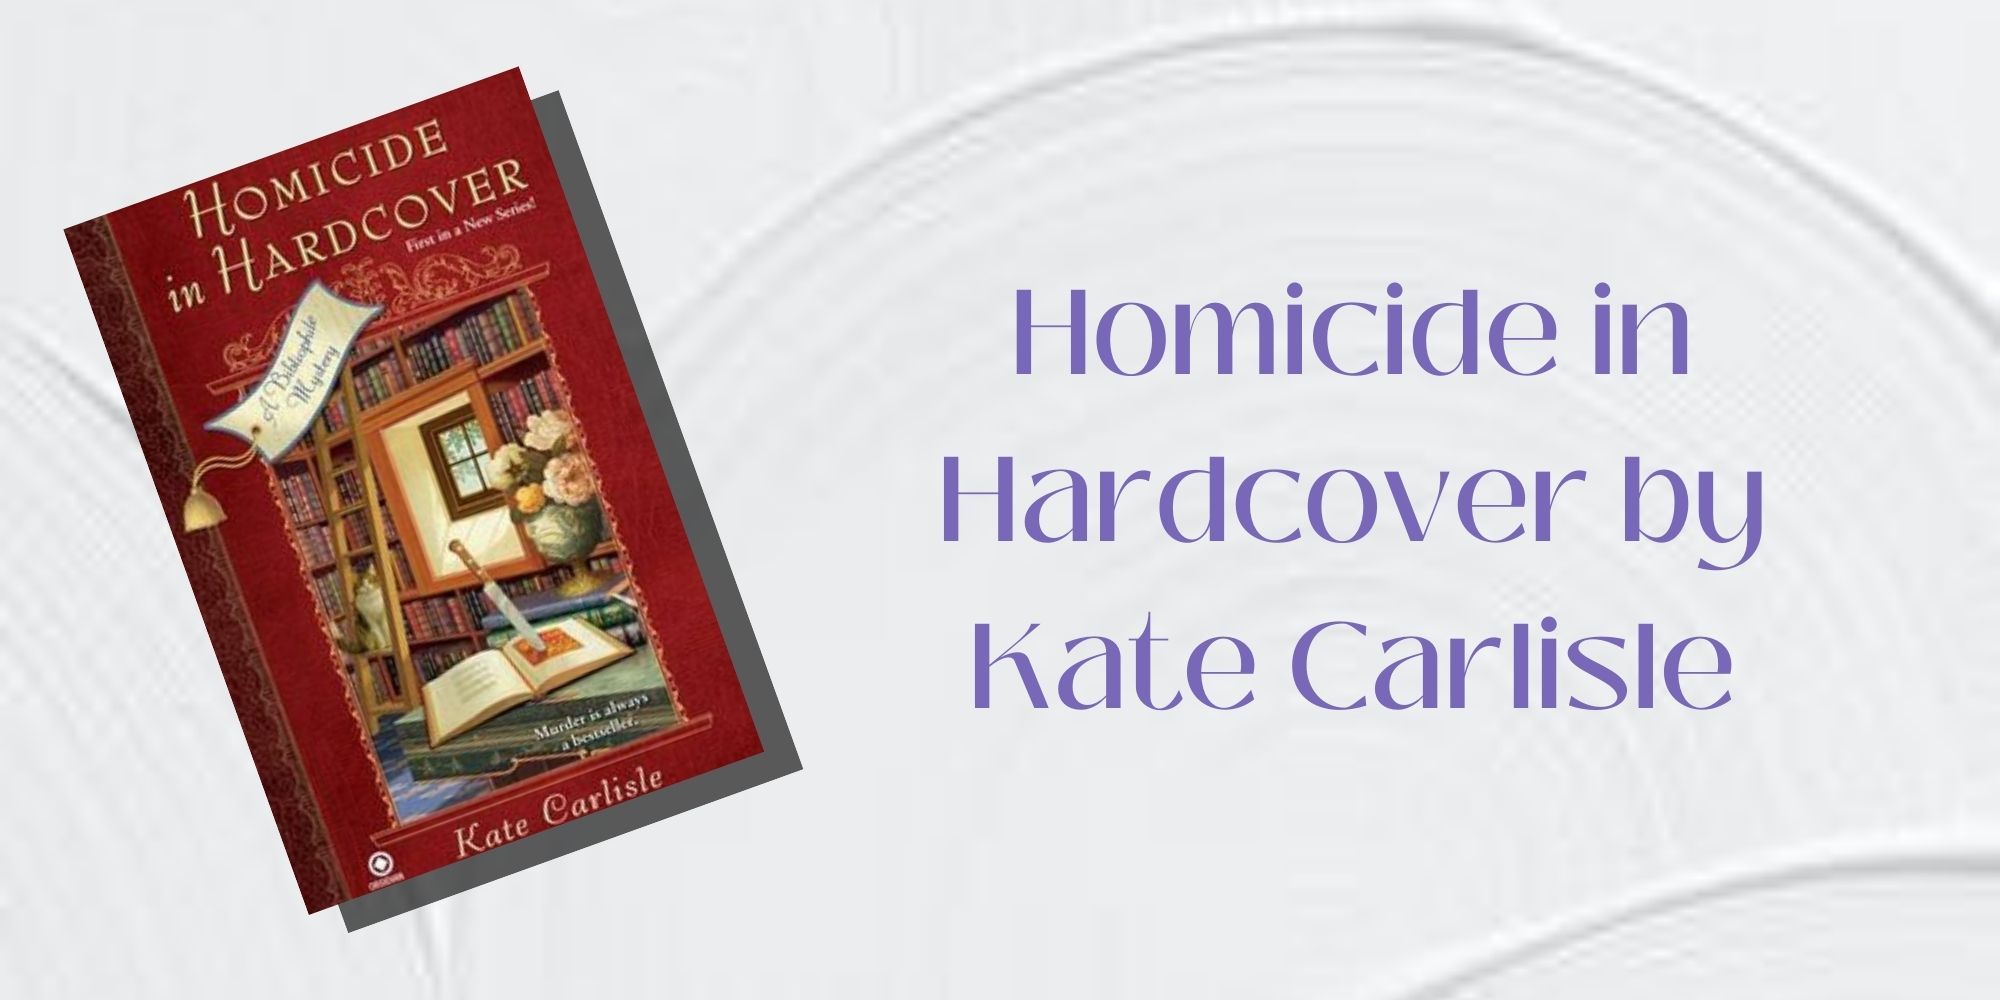 The cover of Homicide in Hardcover by Kate Carlisle